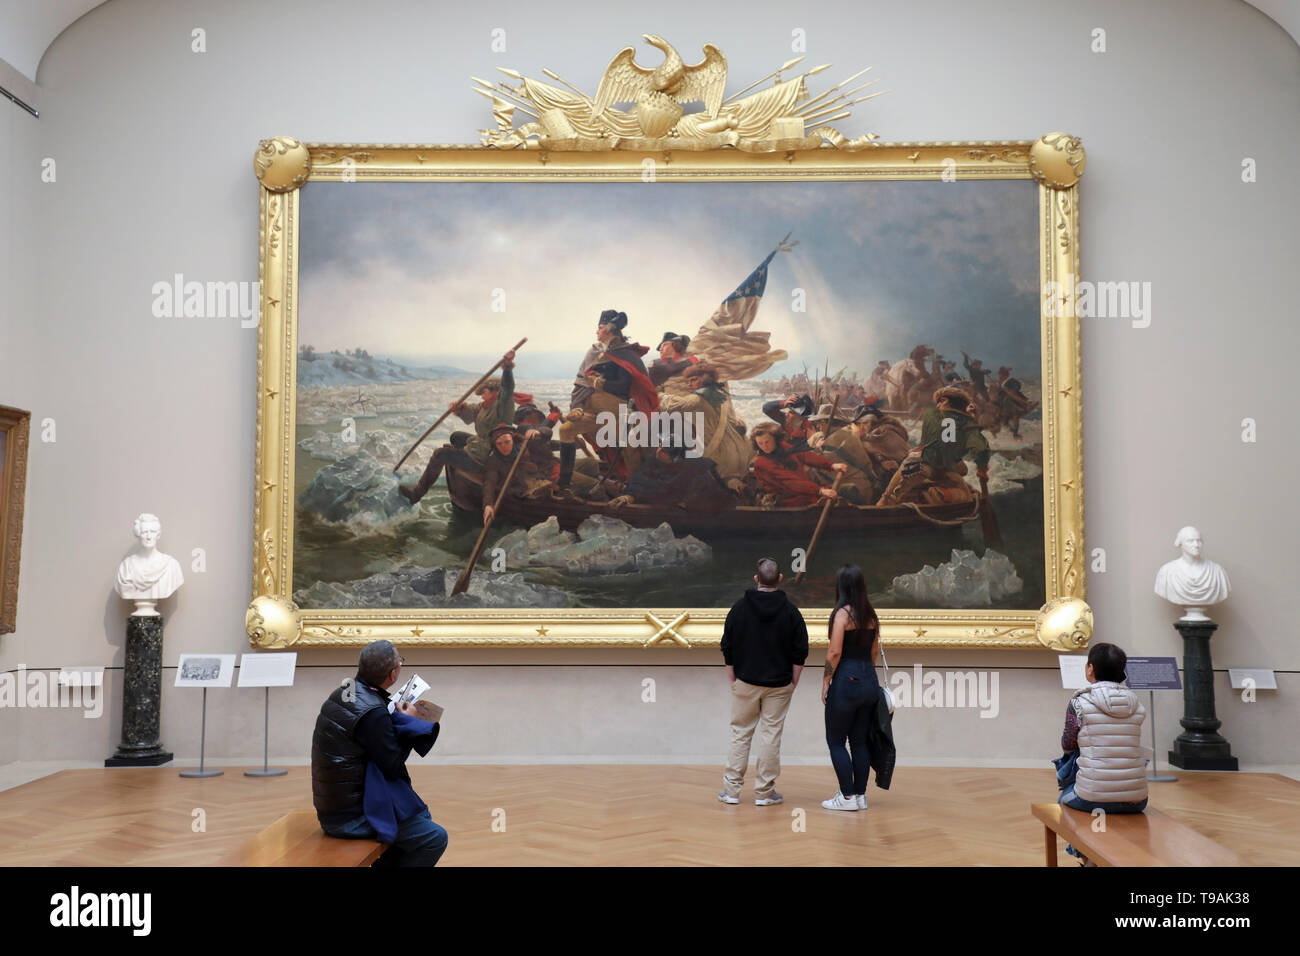 Beijing, USA. 15th May, 2019. People view Washington Crossing the Delaware by Emanuel Leutze displayed at the Metropolitan Museum of Art in New York, the United States, May 15, 2019. Saturday marks the International Museum Day. Credit: Wang Ying/Xinhua/Alamy Live News Stock Photo